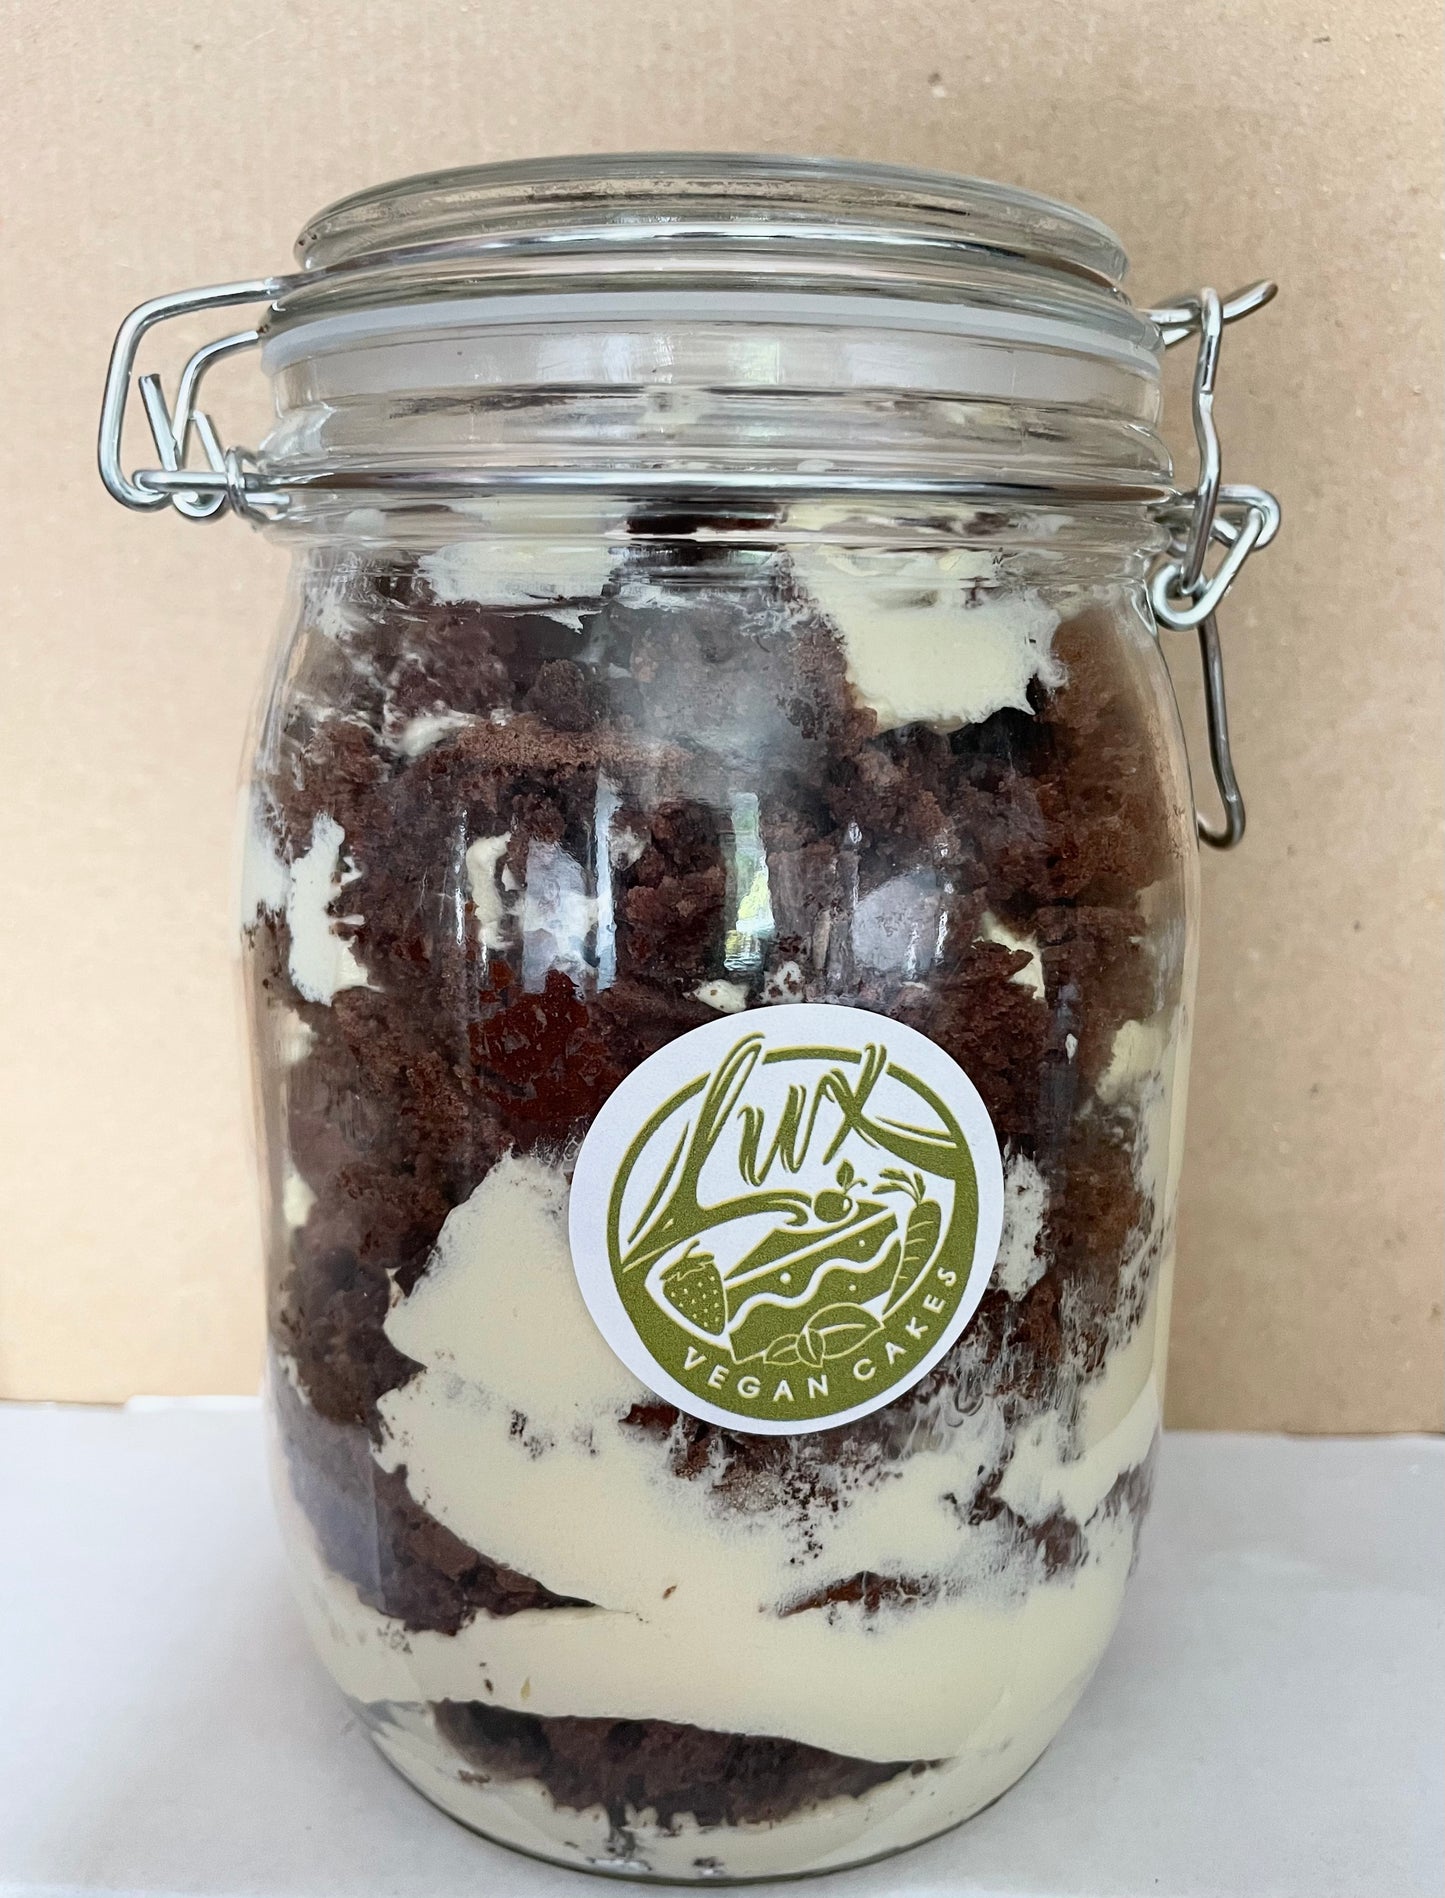 XL Cookies and cream Cake in a Jar